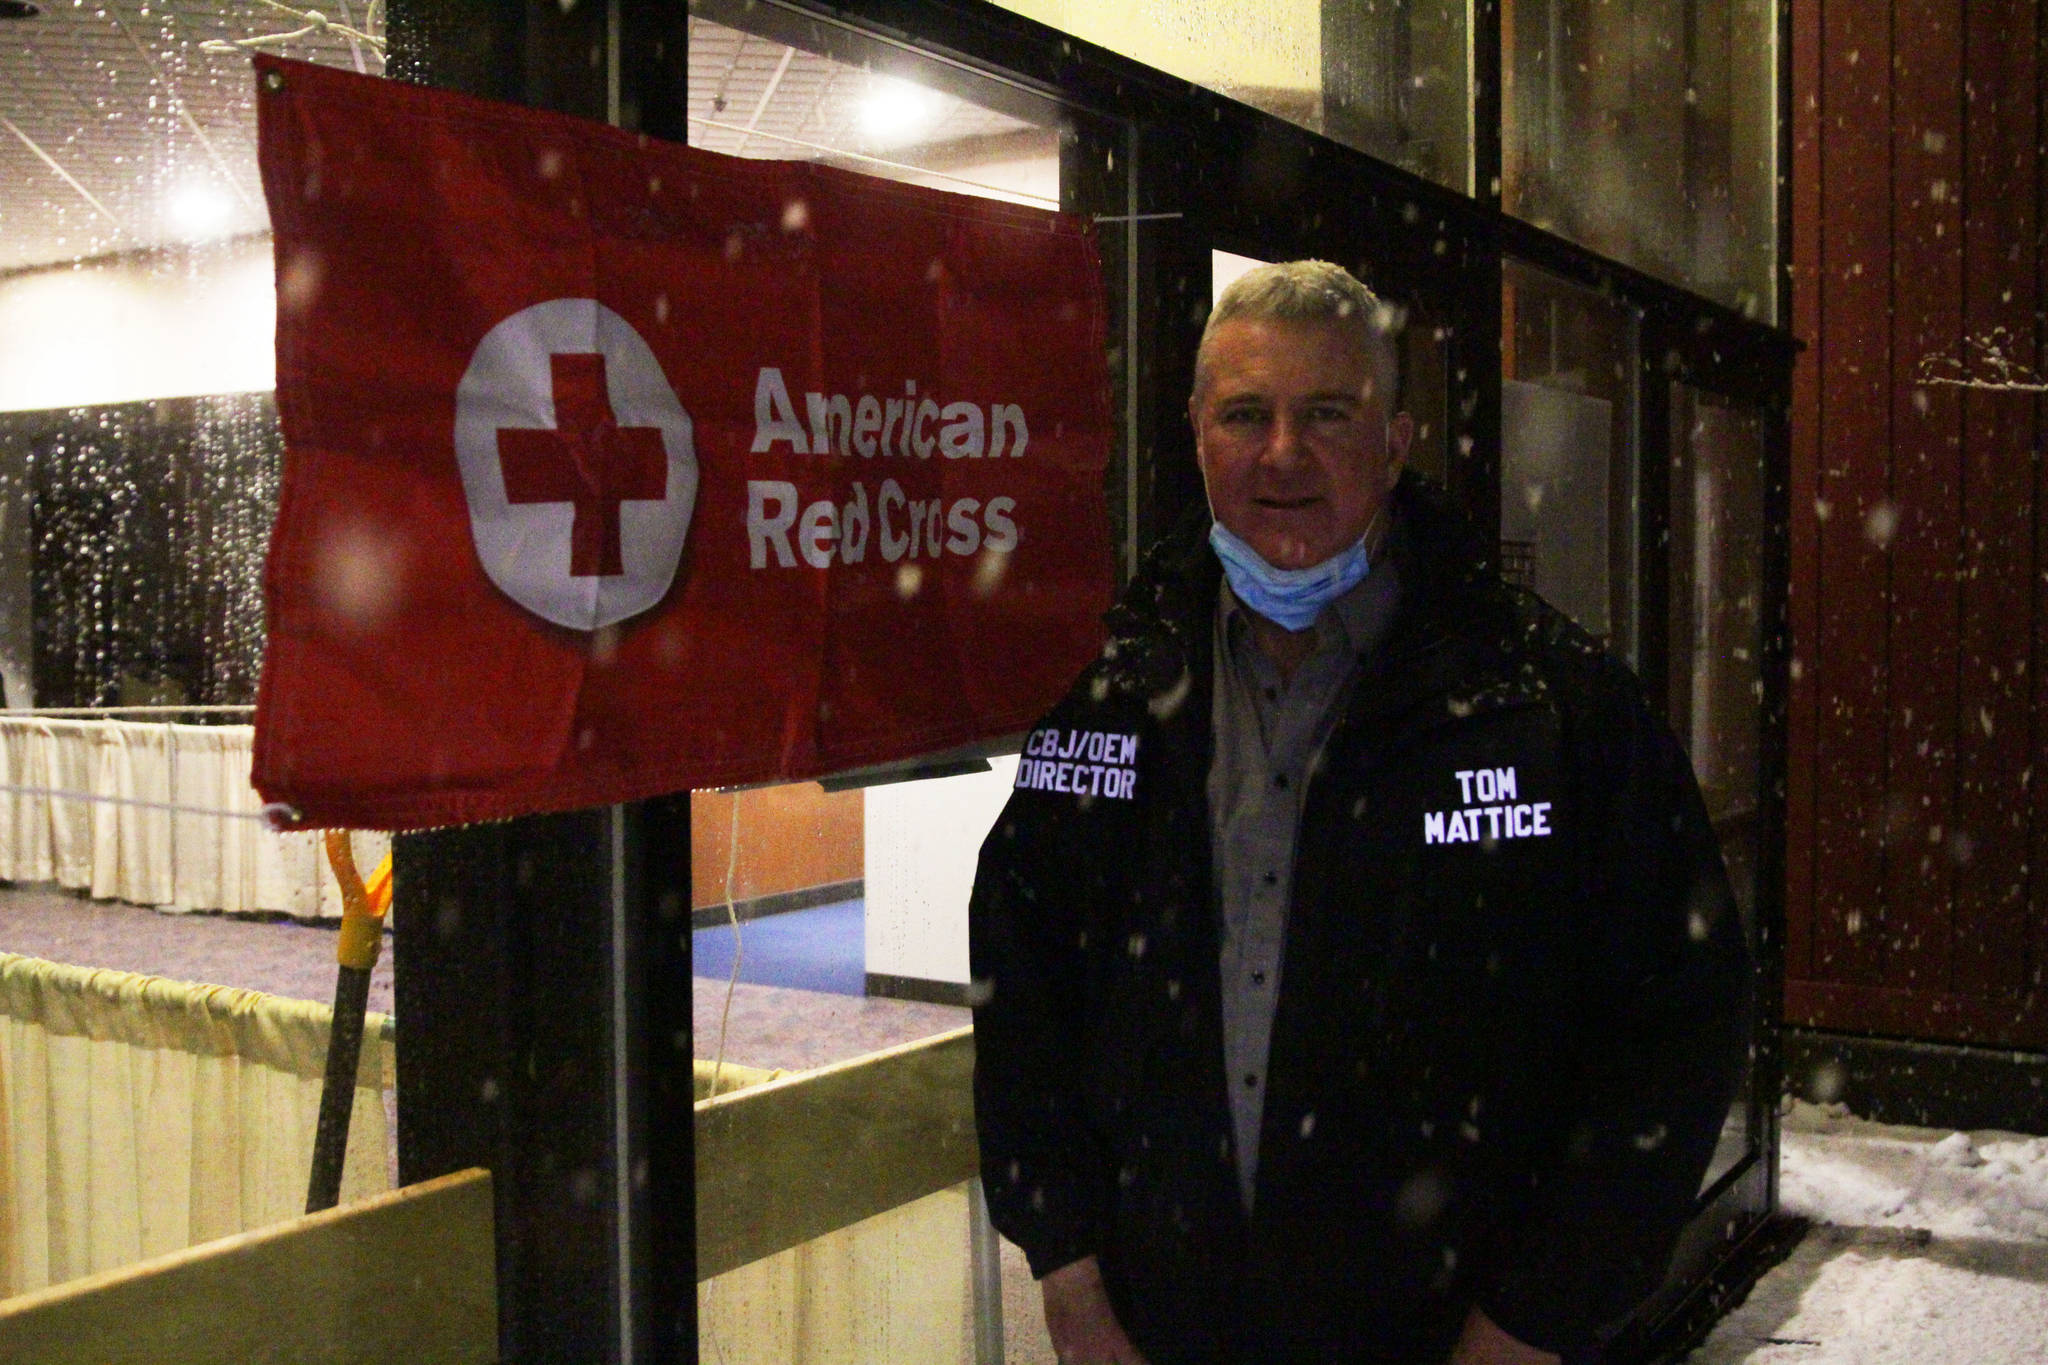 City and Borough of Juneau emergency program manager Tom Mattice stands outside Centennial Hall, appropriated as an evacuation shelter for those in the path of possible avalanches on Feb. 27, 2021. (Michael S. Lockett / Juneau Empire)